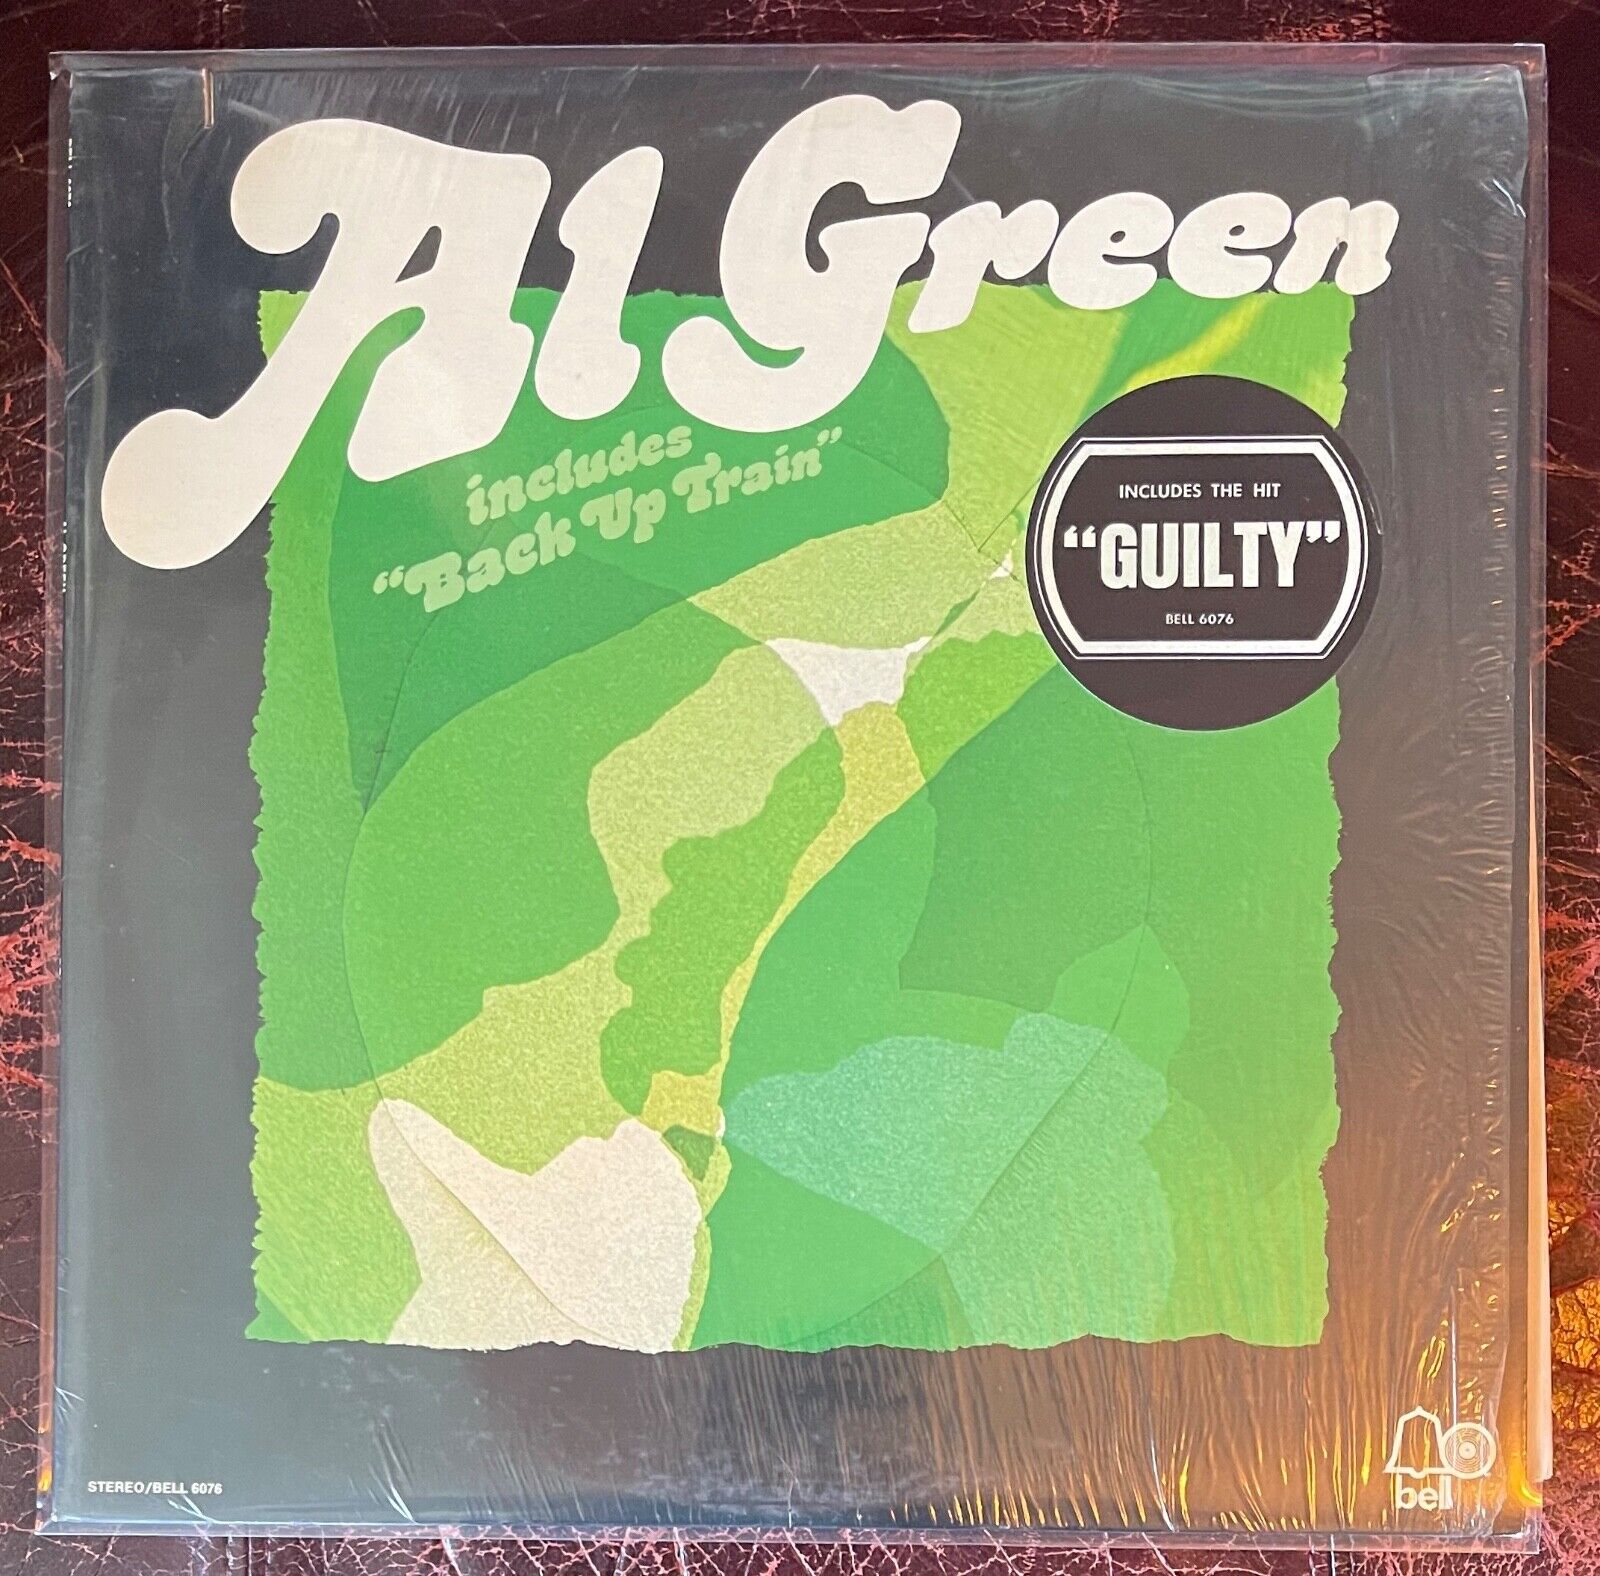 AL GREEN Back Up Train (1972 Vinyl LP RECORD) NM- play tested